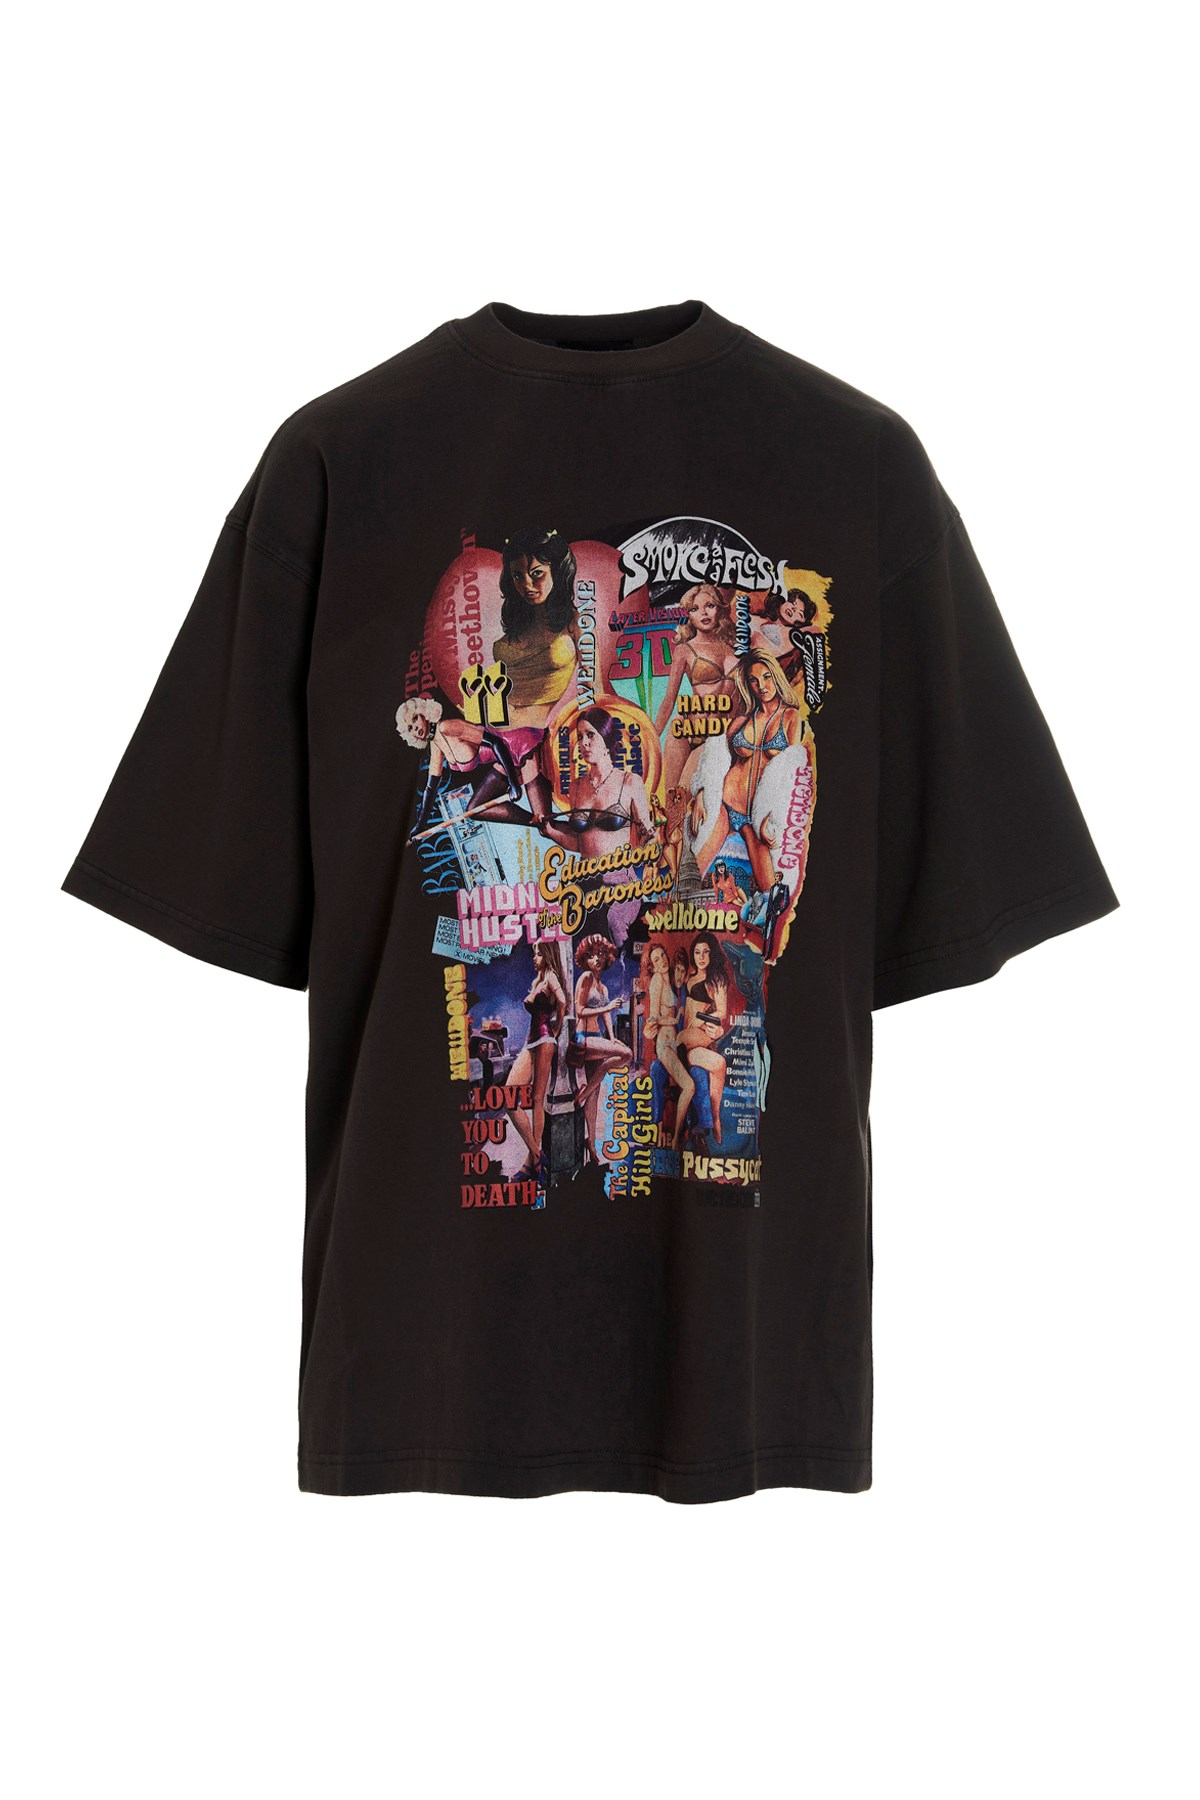 WE11DONE ‘New Movie Collage’ Unisex T-Shirt